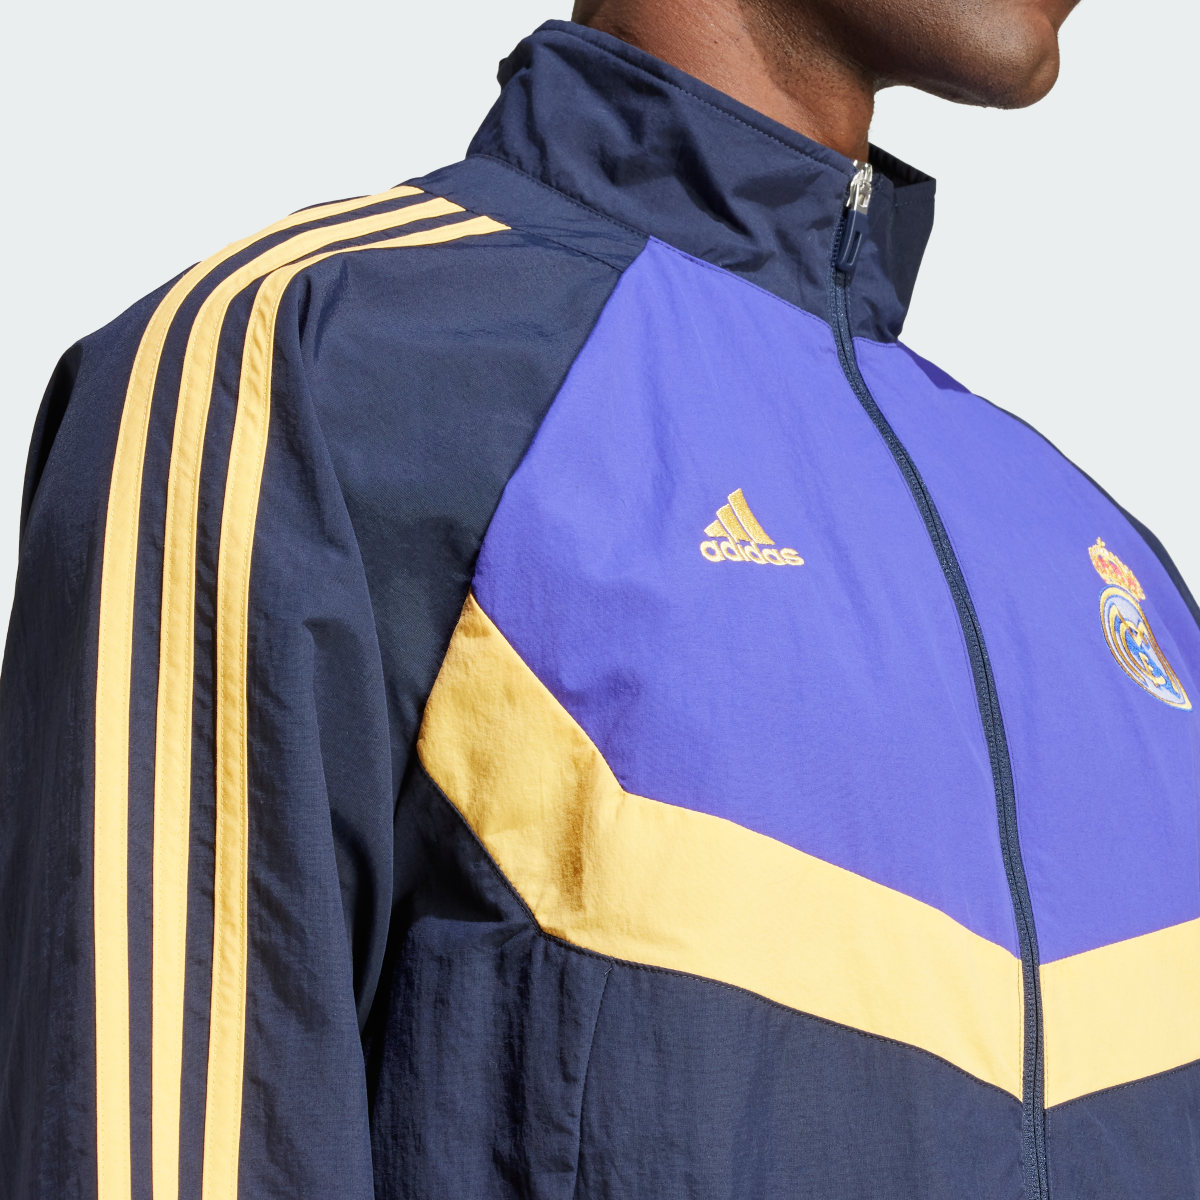 Adidas Real Madrid Woven Track Top. 7